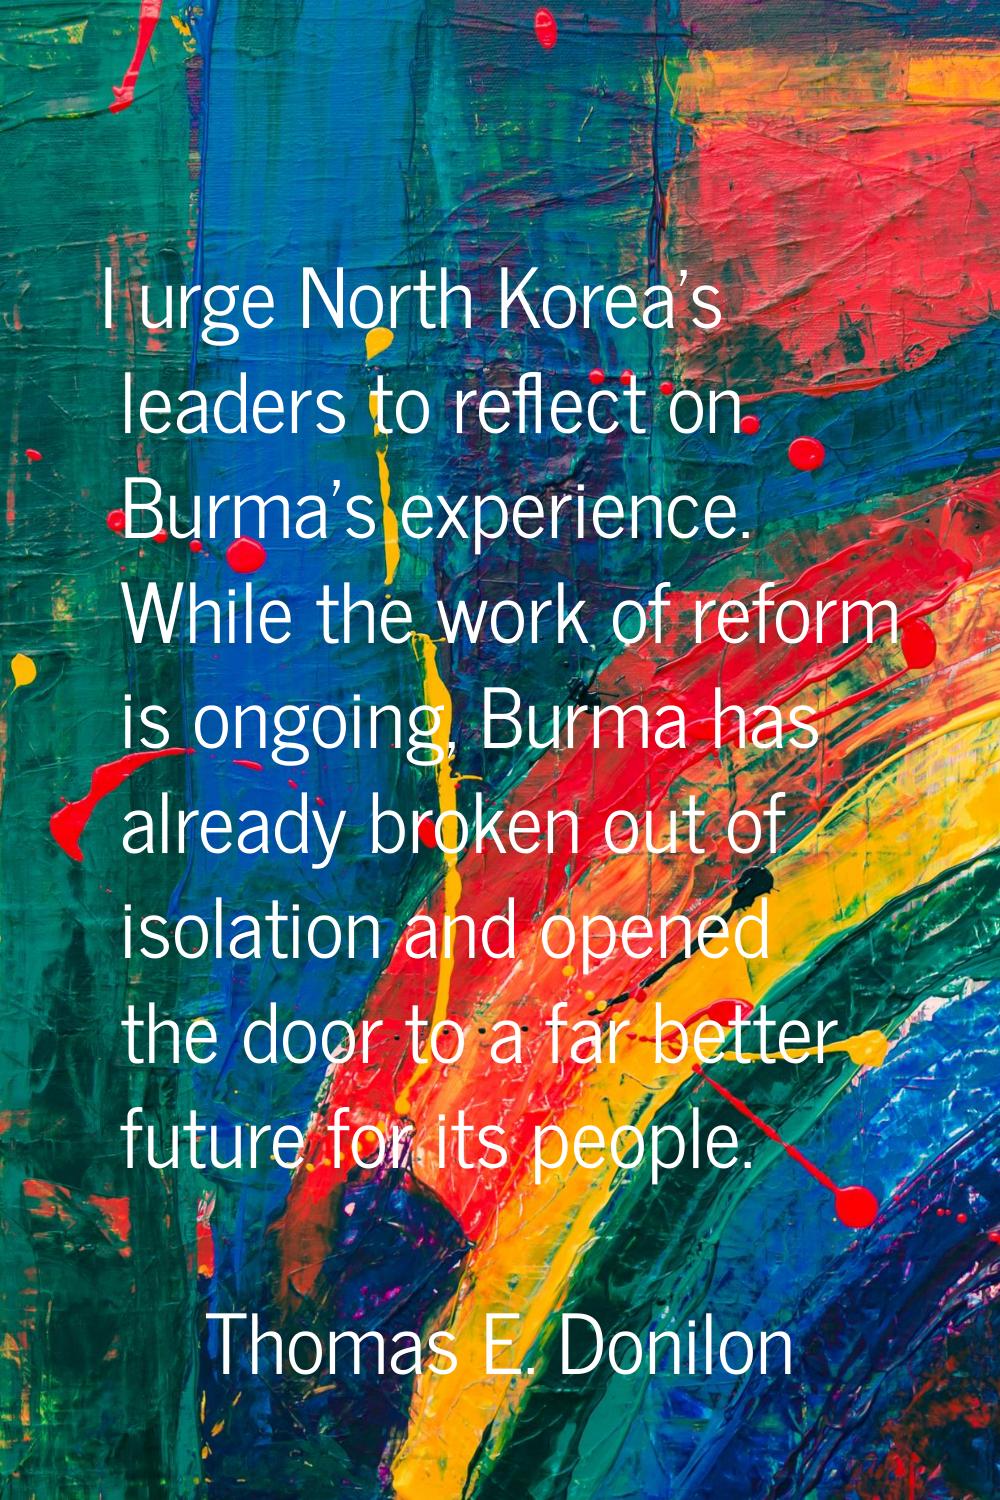 I urge North Korea's leaders to reflect on Burma's experience. While the work of reform is ongoing,